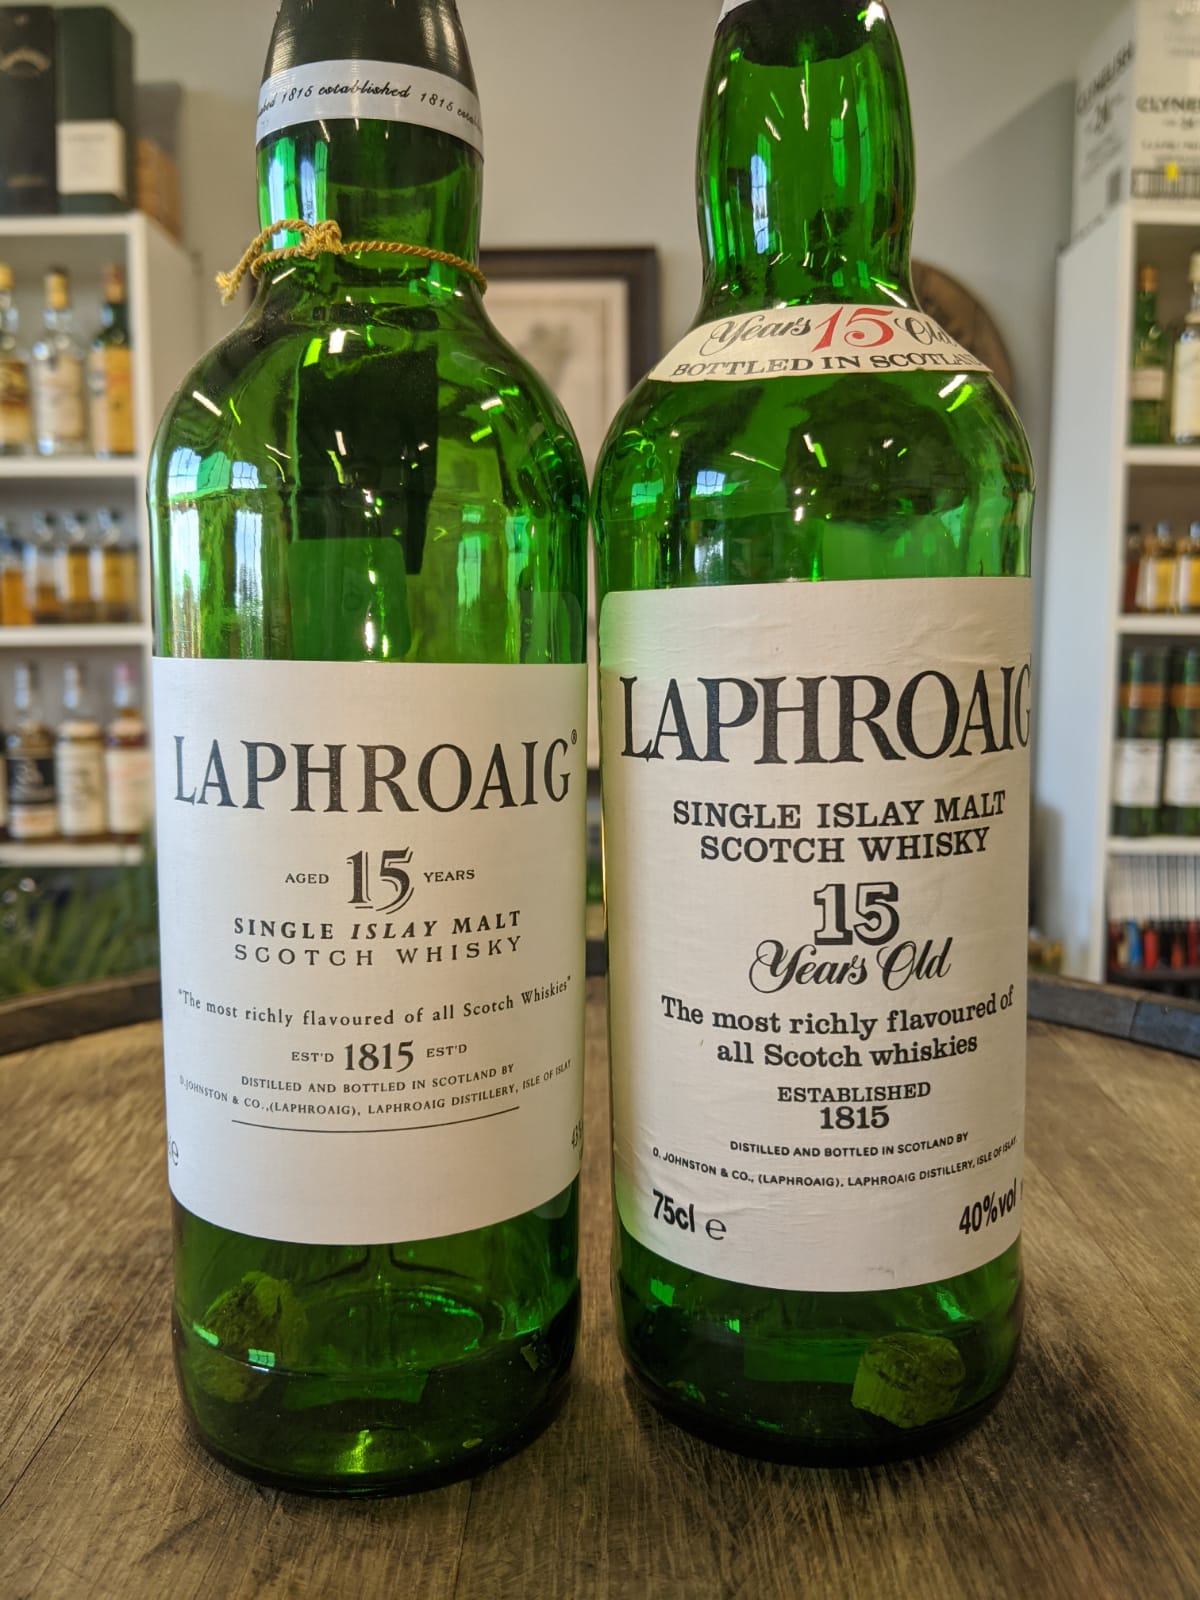 Two bottles of Laphroaig, both from the 1990s.